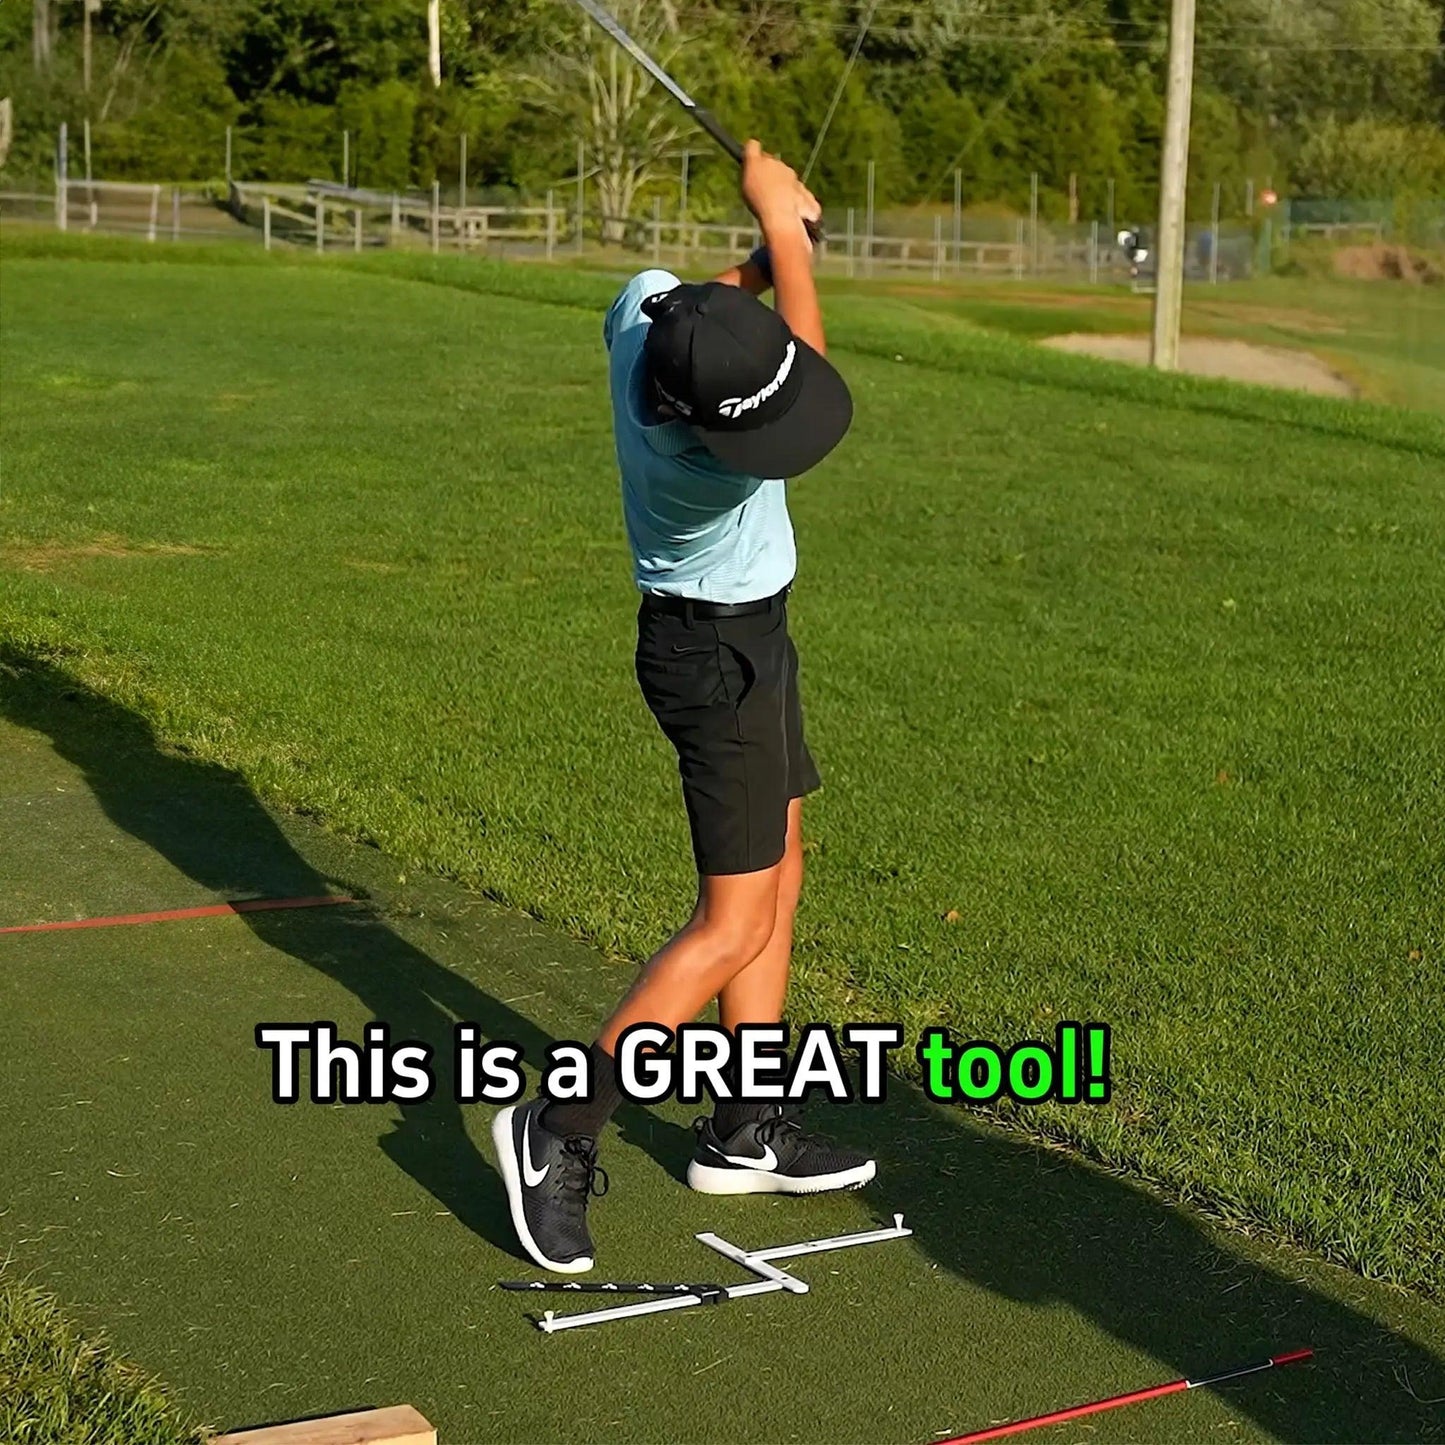 Stance Caddy: Golf Stance and Alignment Training Aid - Golf Training Aid